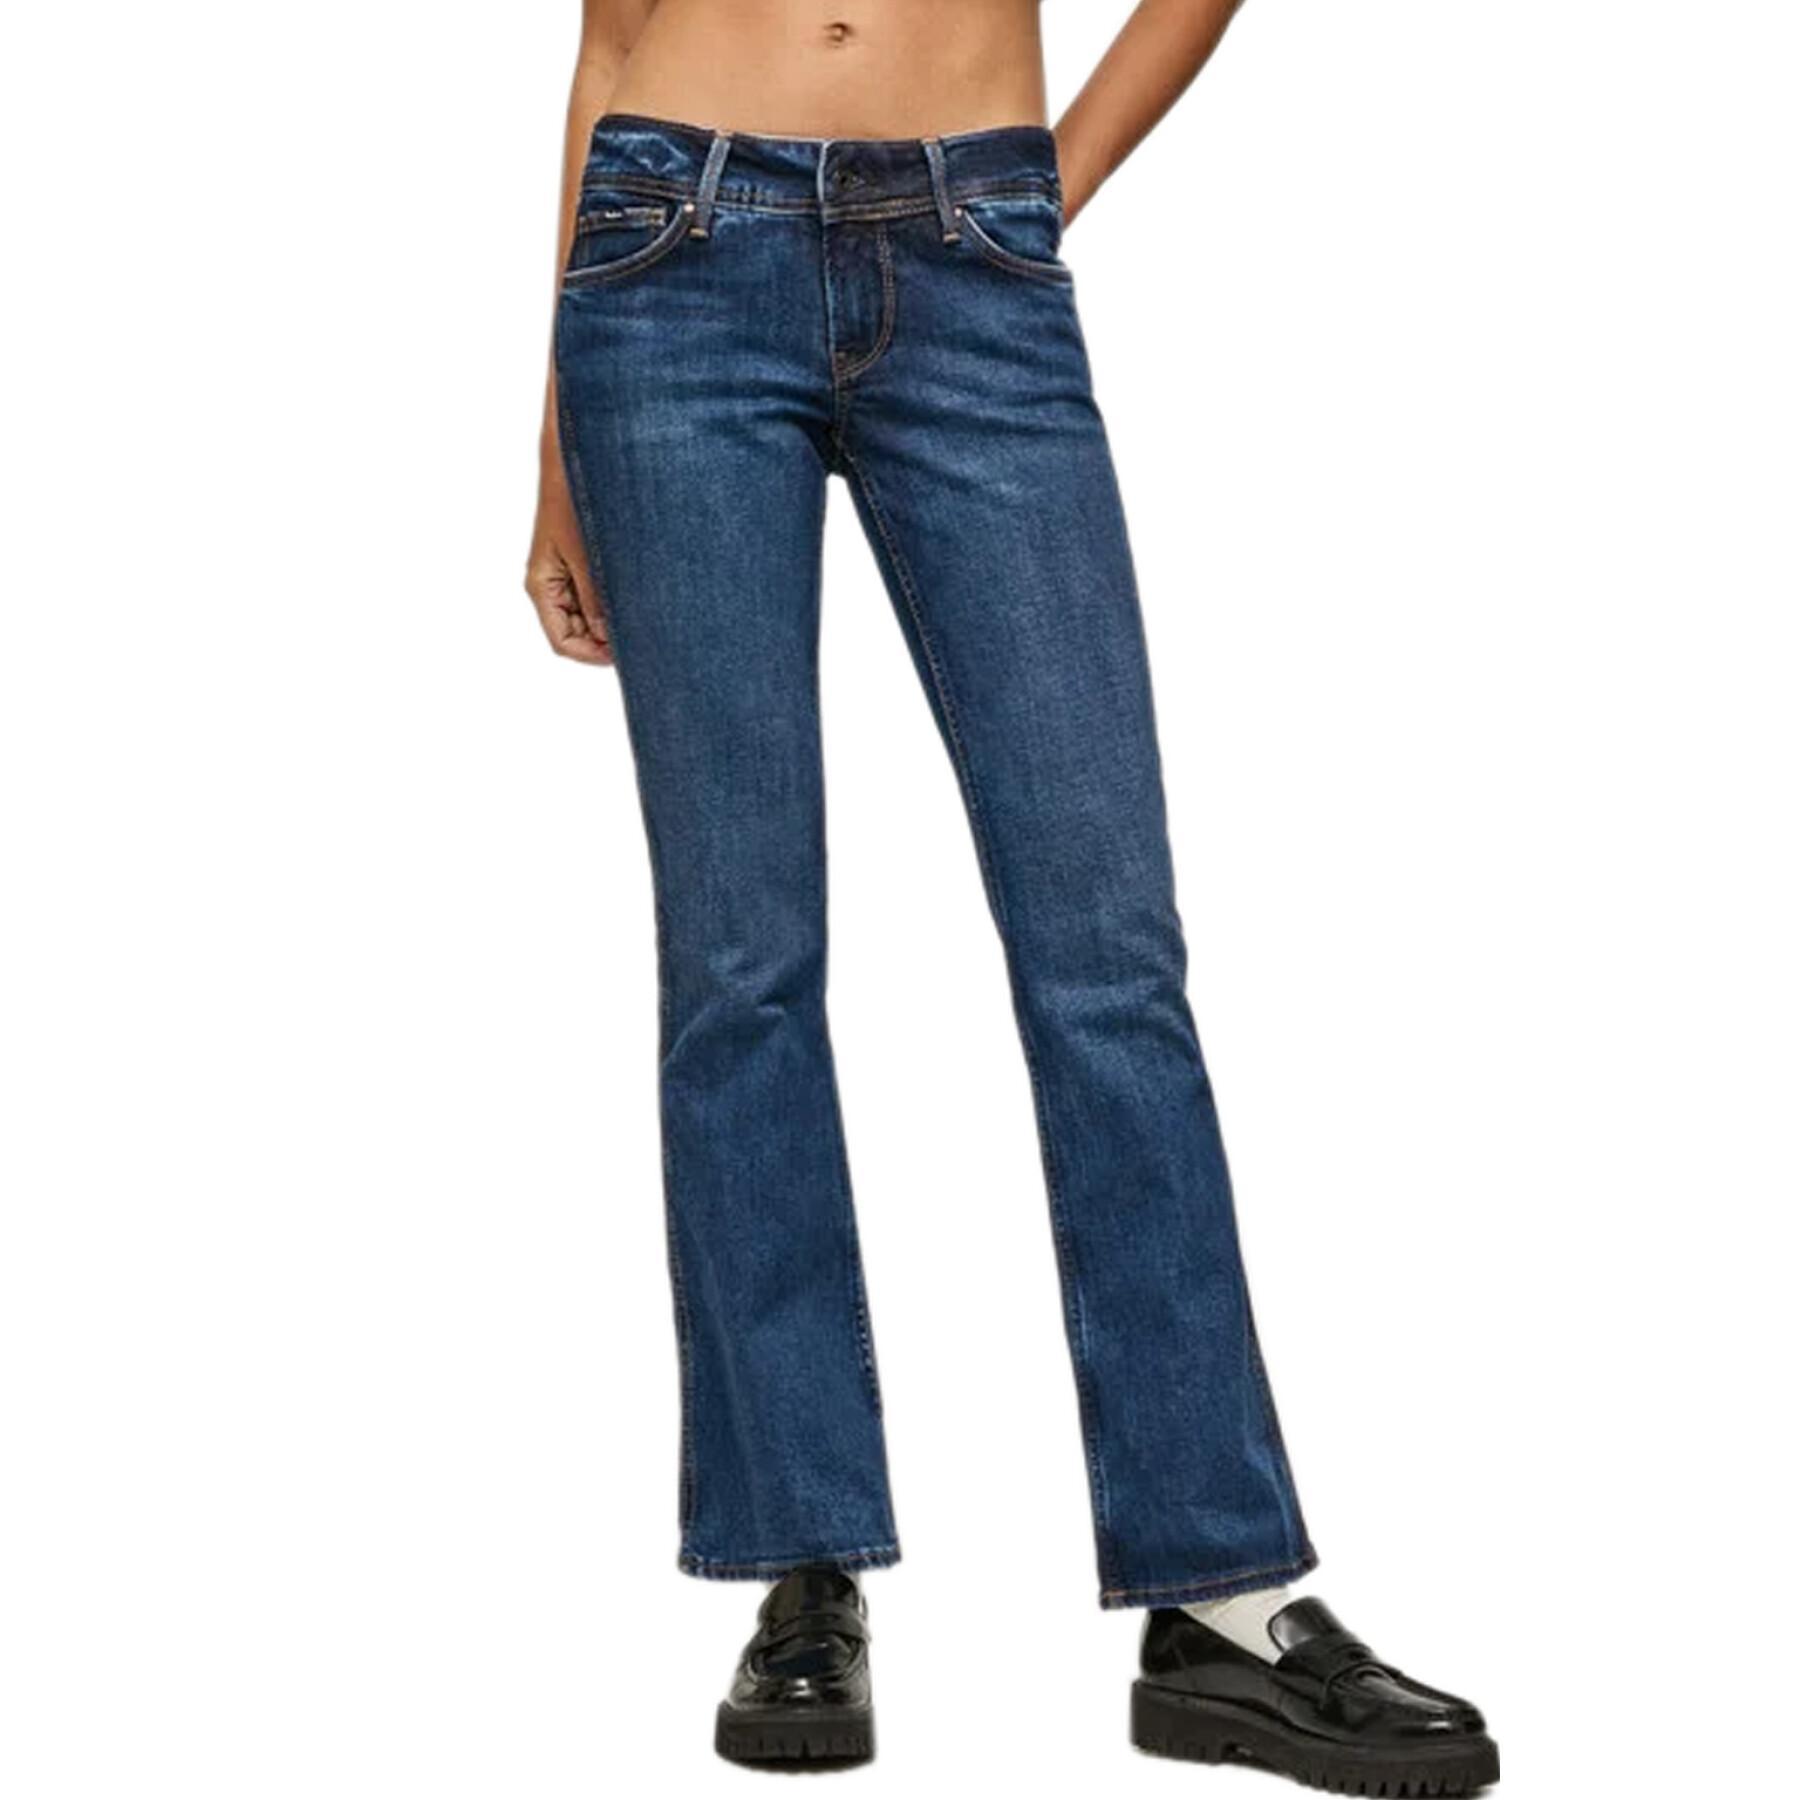 Jeans femme Pepe Jeans New Pimlico